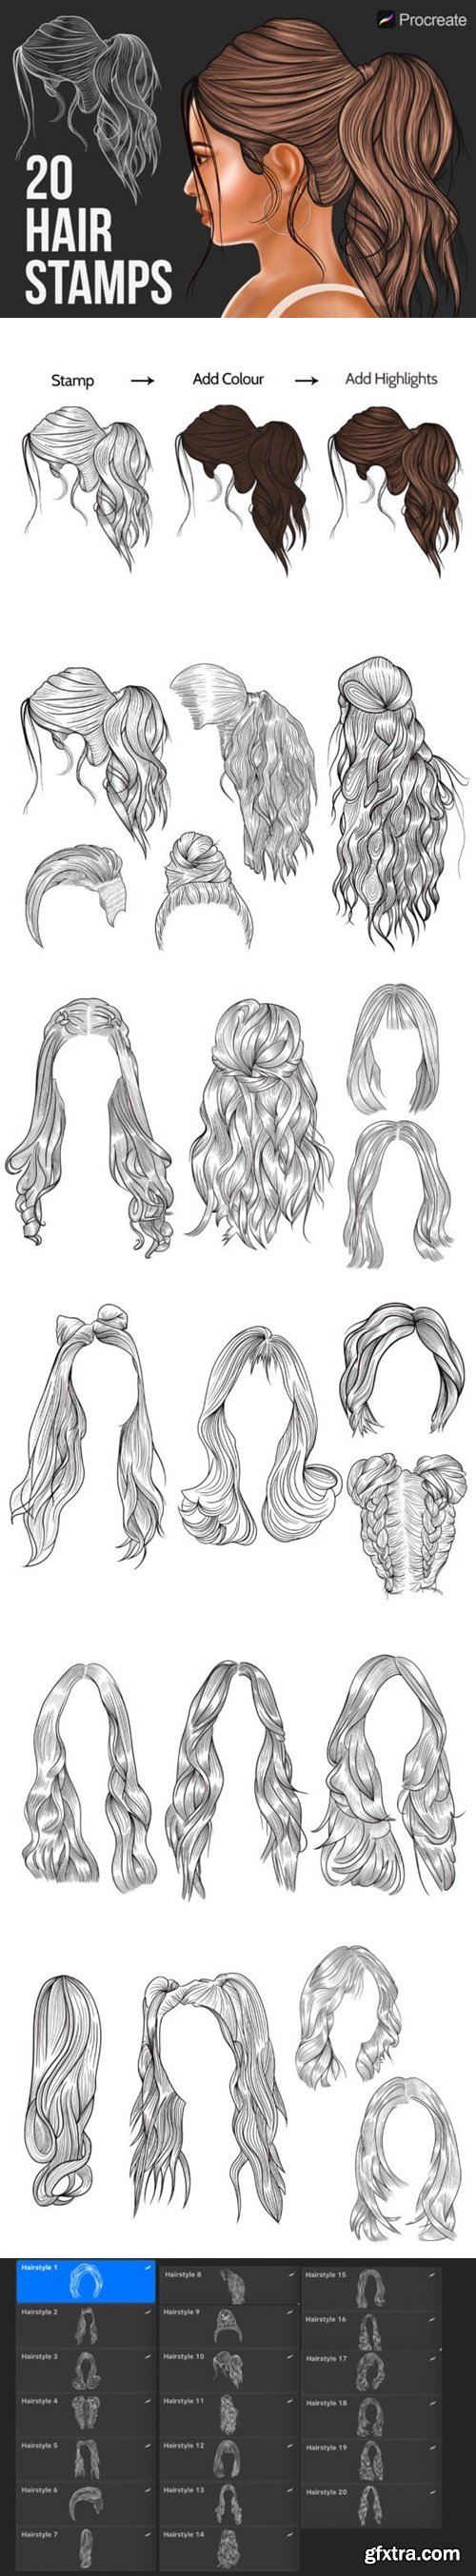 Hairstyle Stamp Brushes (Procreate) 88133563